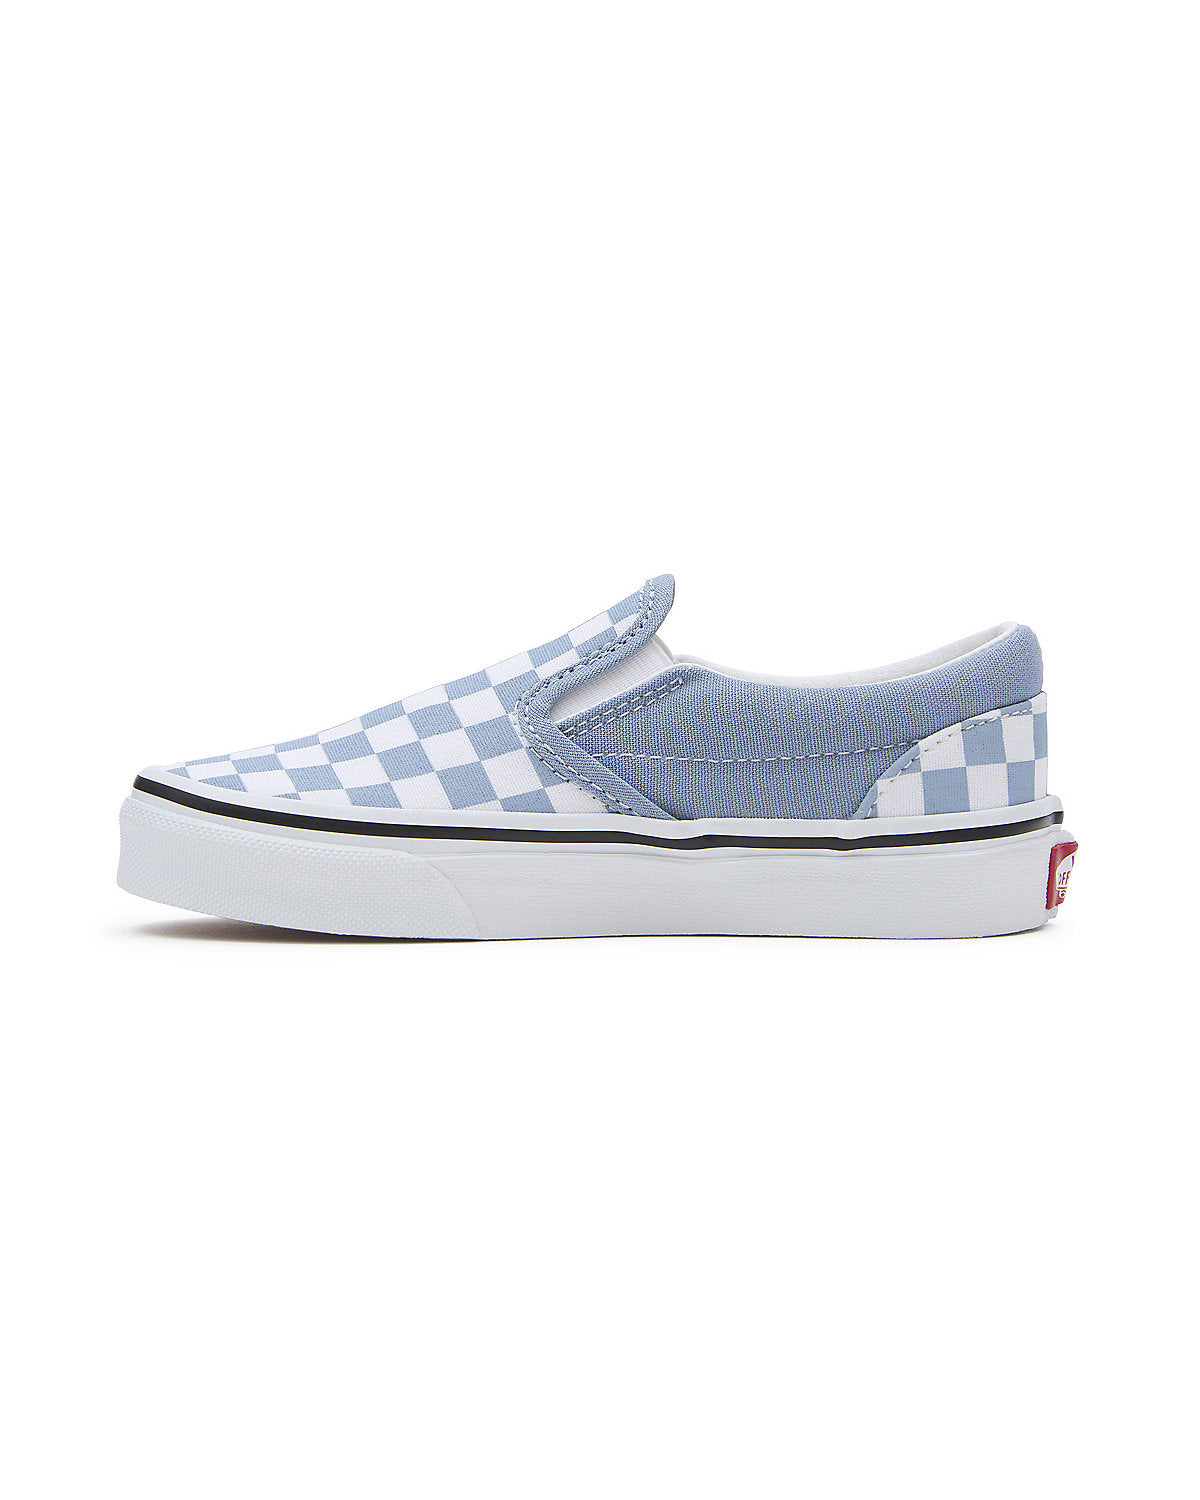 VANS Kids Classic Slip-On Color Theory Checkerboard Trainers - Dusty Blue